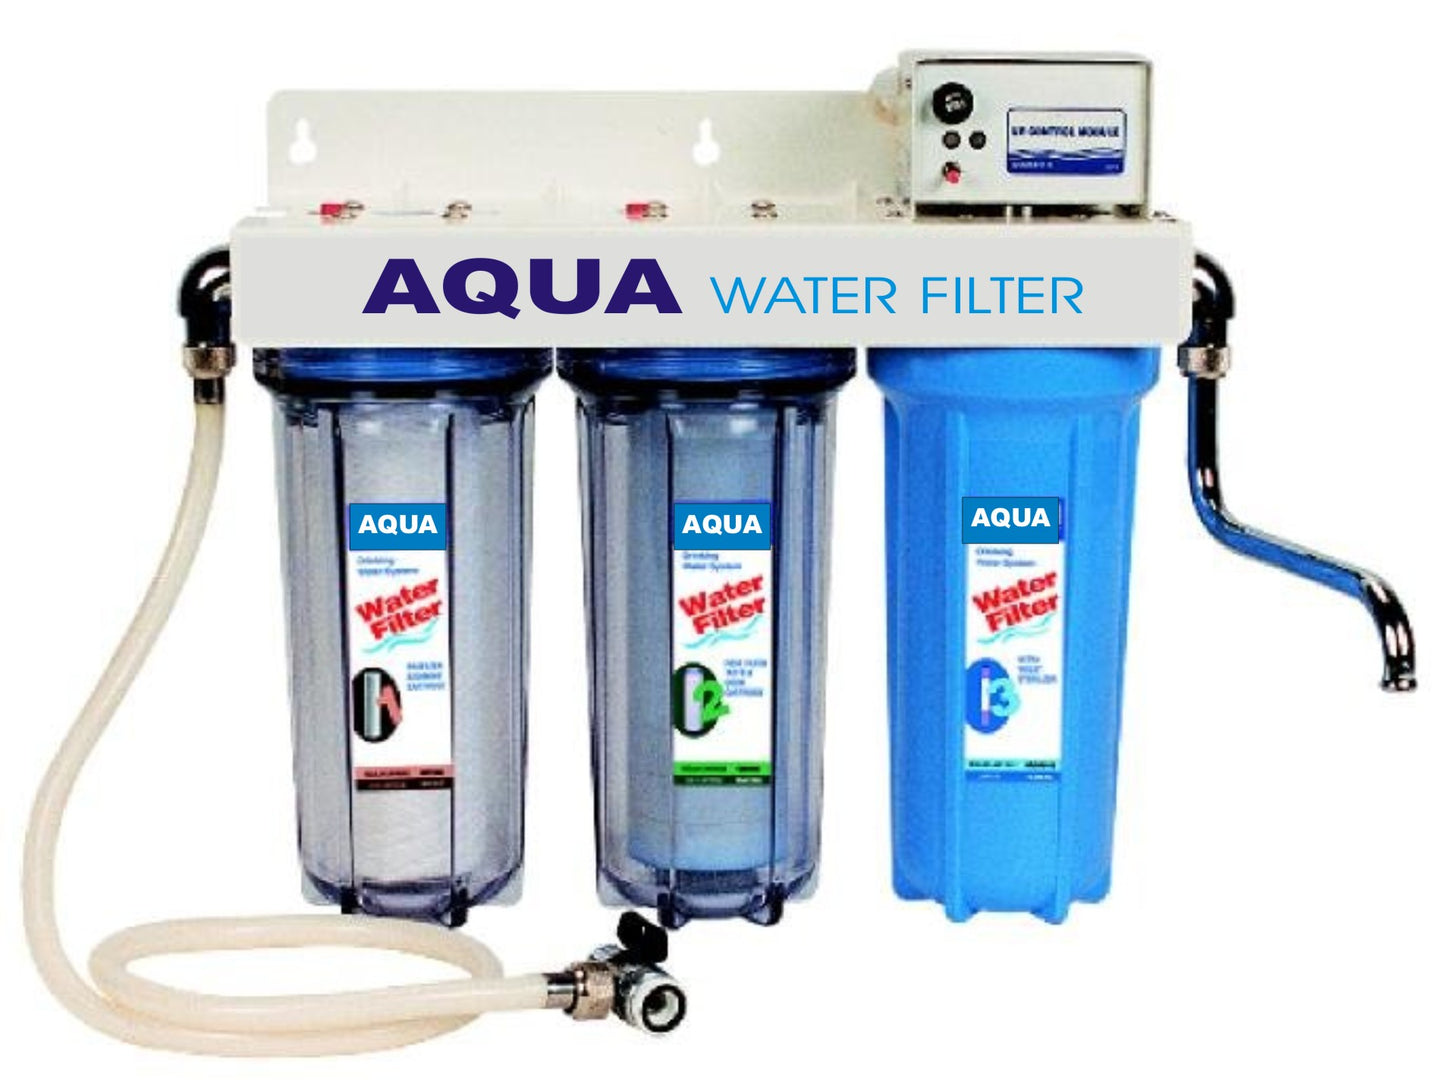 Aqua Safe Water Filter 3 Stages water Filtration Light for bacteria/germs Clean and Pure Drinking Water